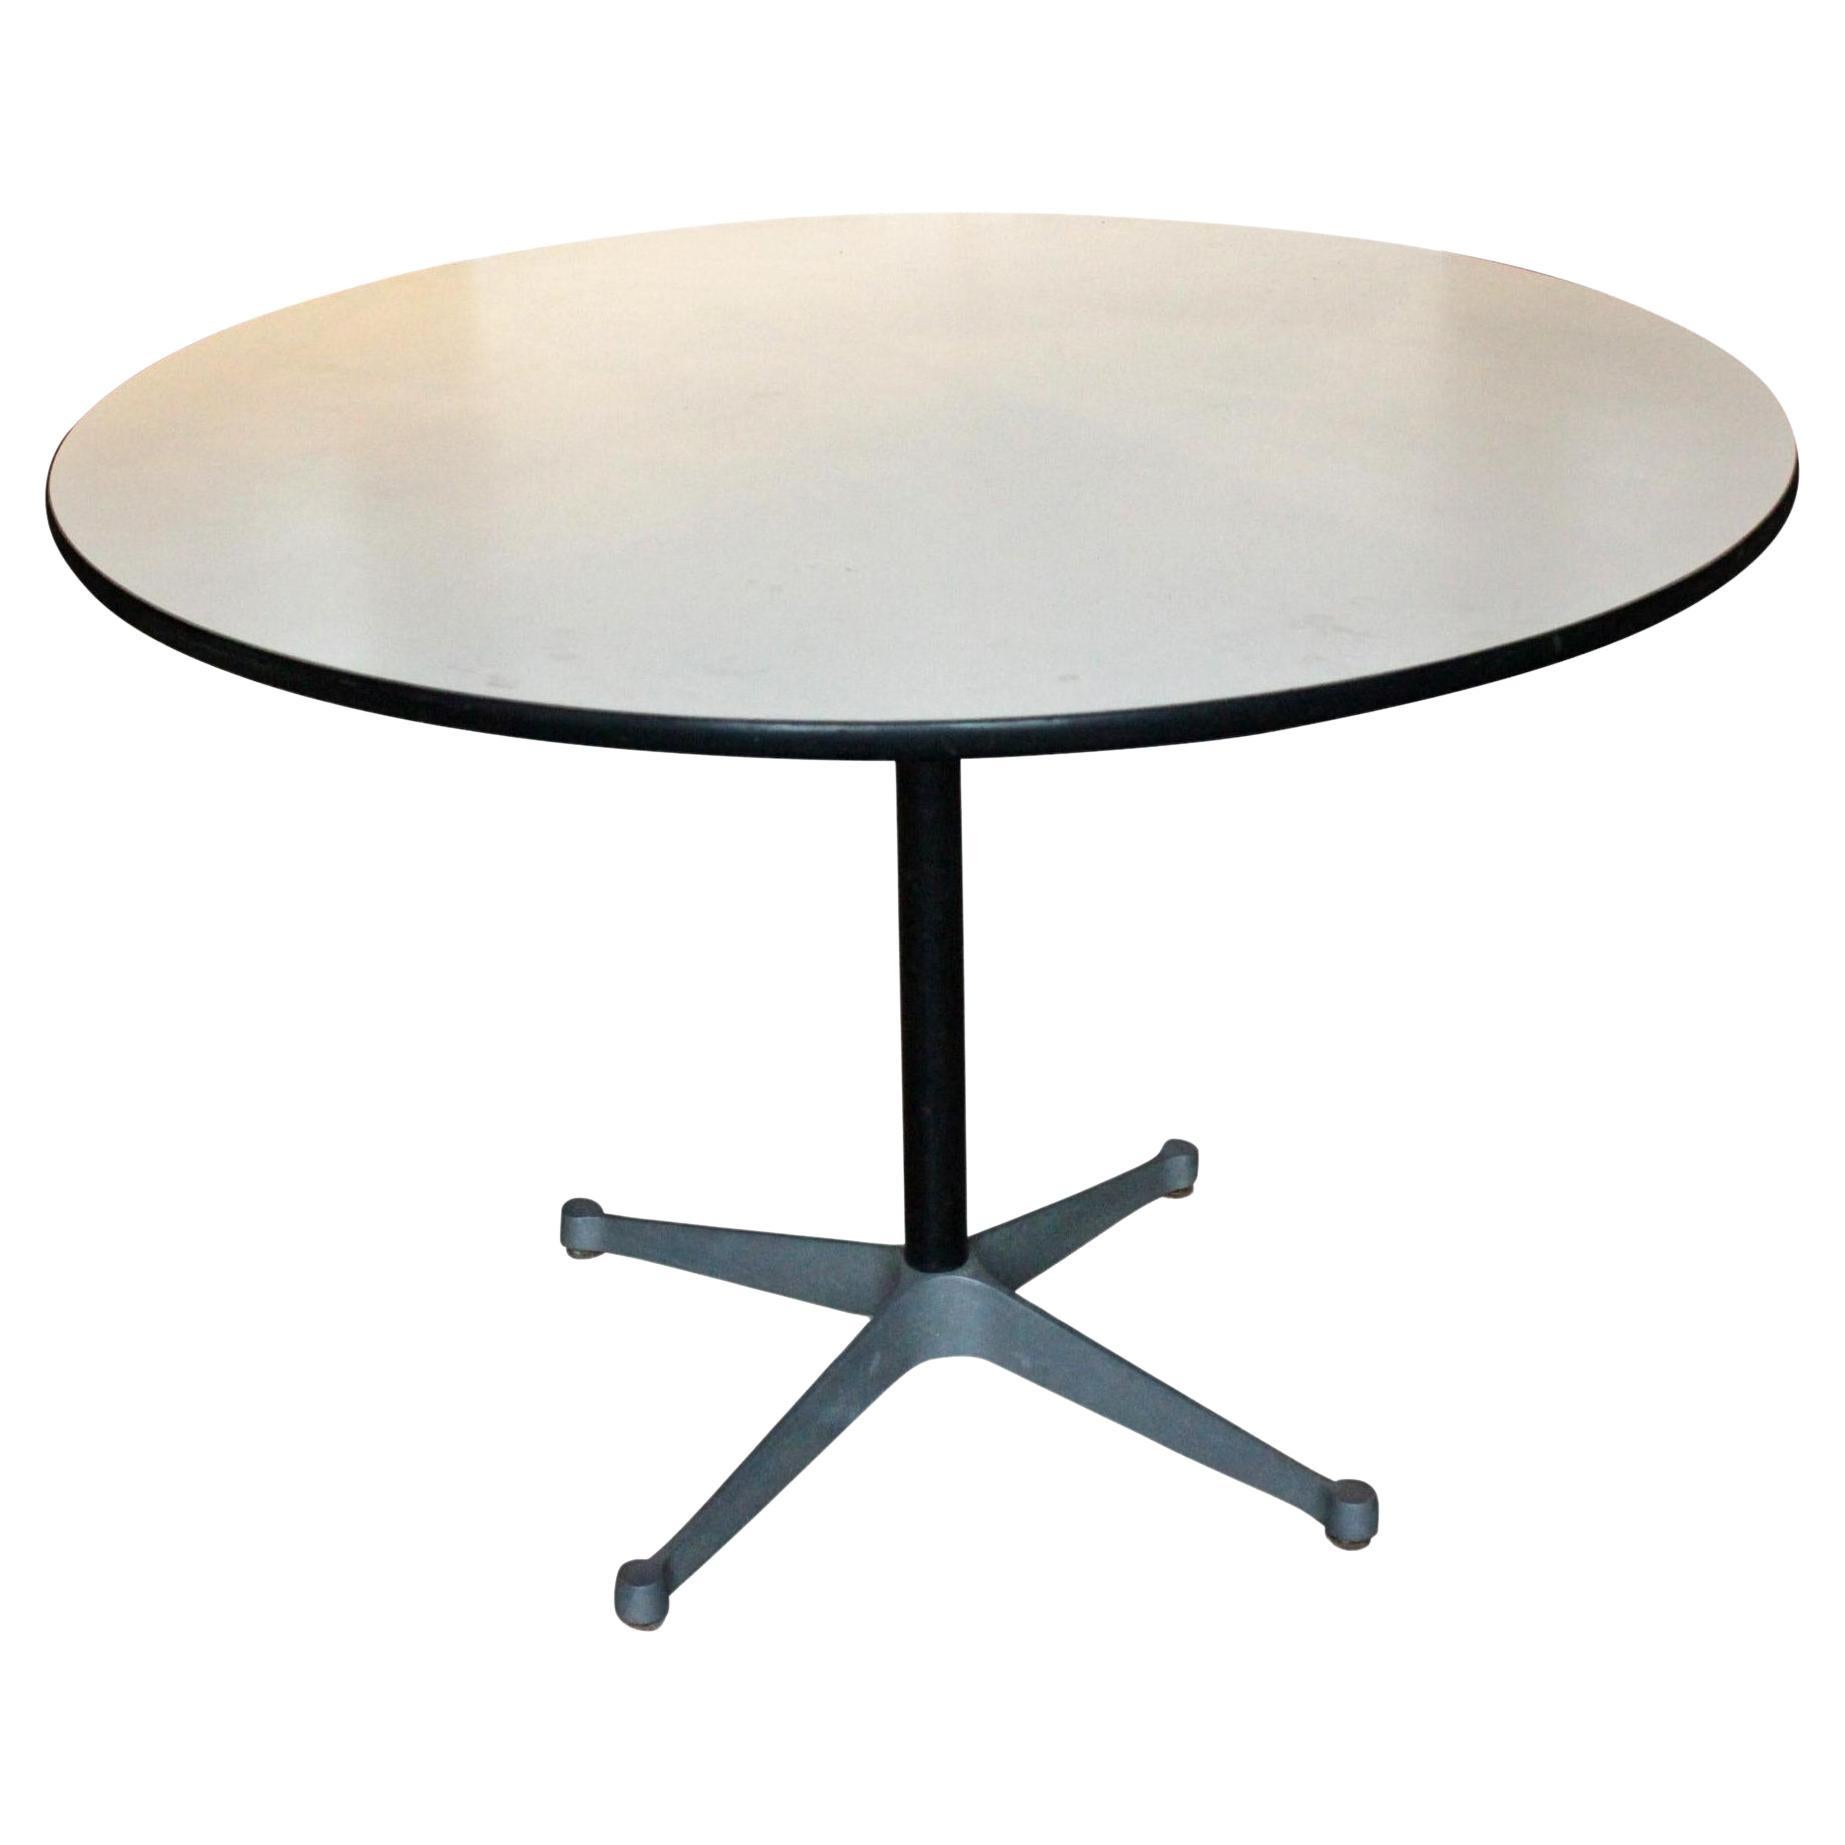 Circa 1960s-70s American Circular Table by Herman Miller For Sale